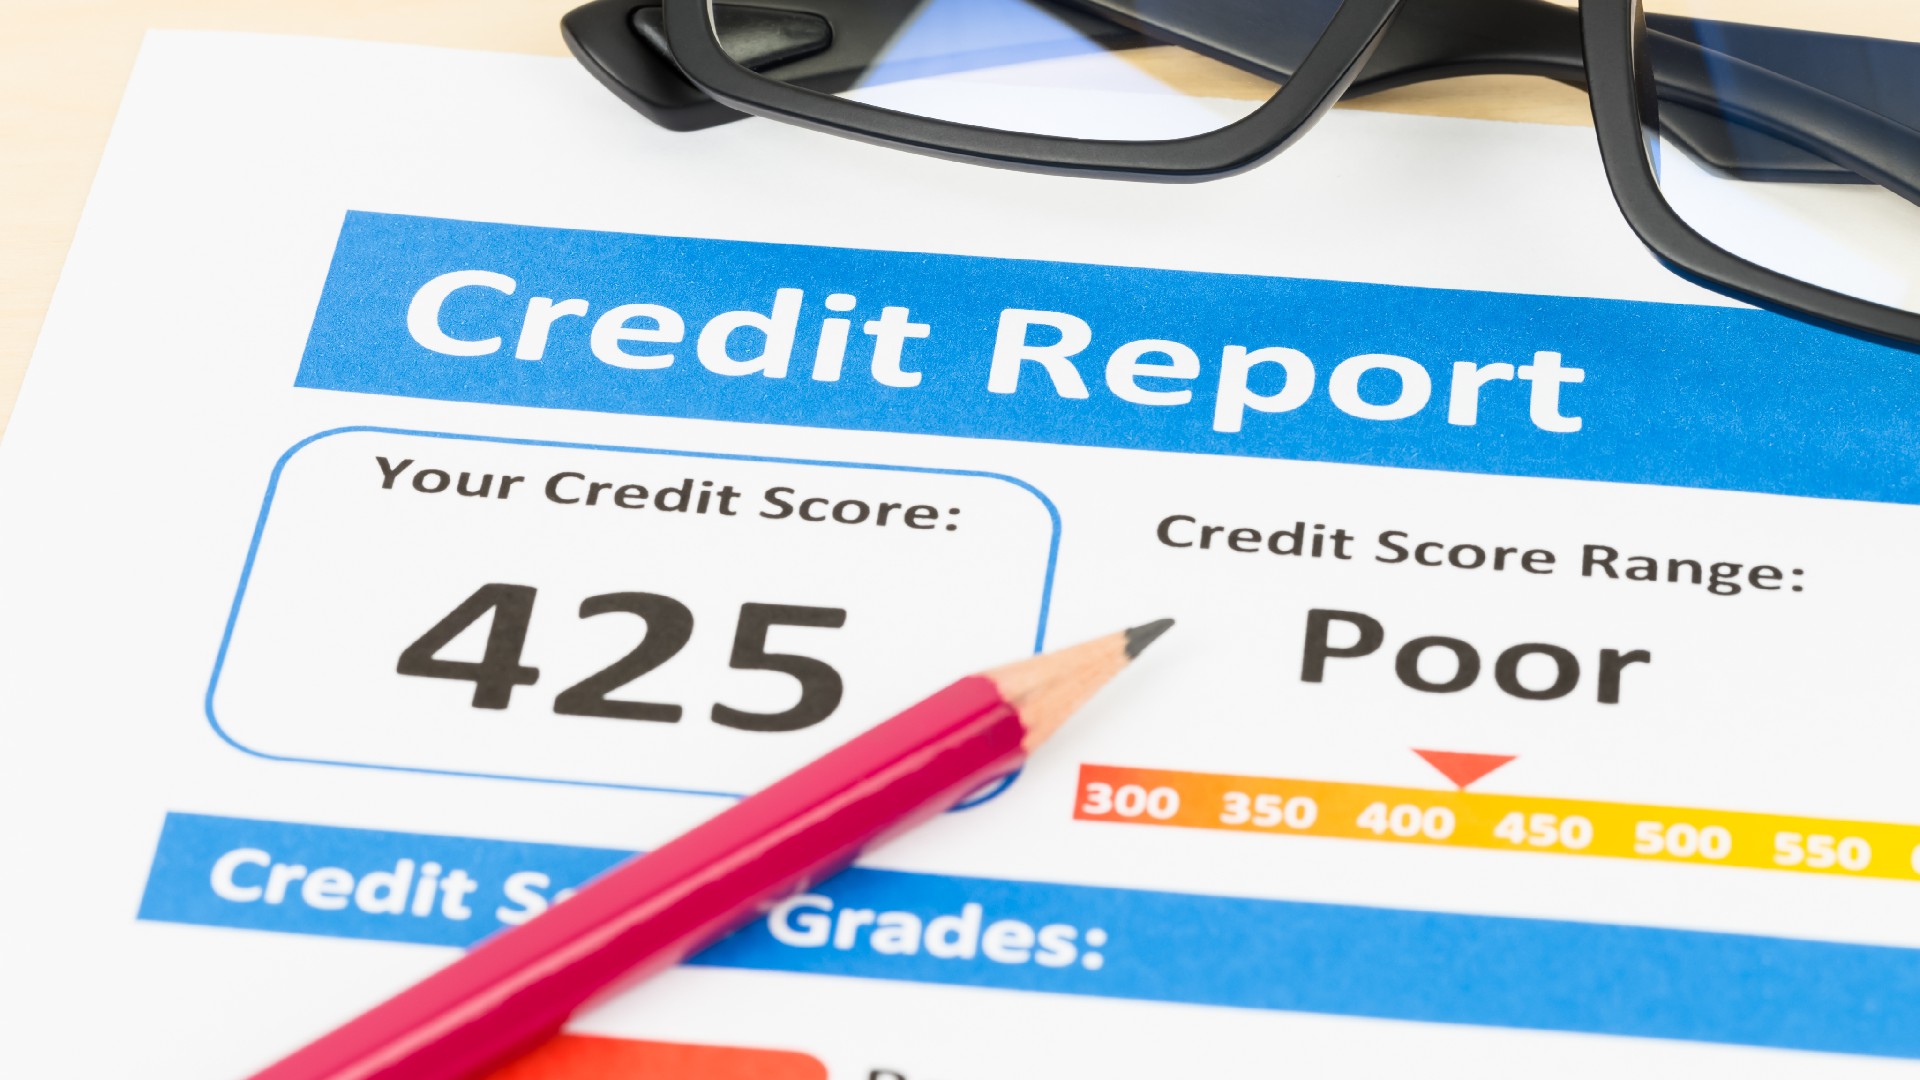 A poor credit score of 424 shows how foreclosure can impact your life